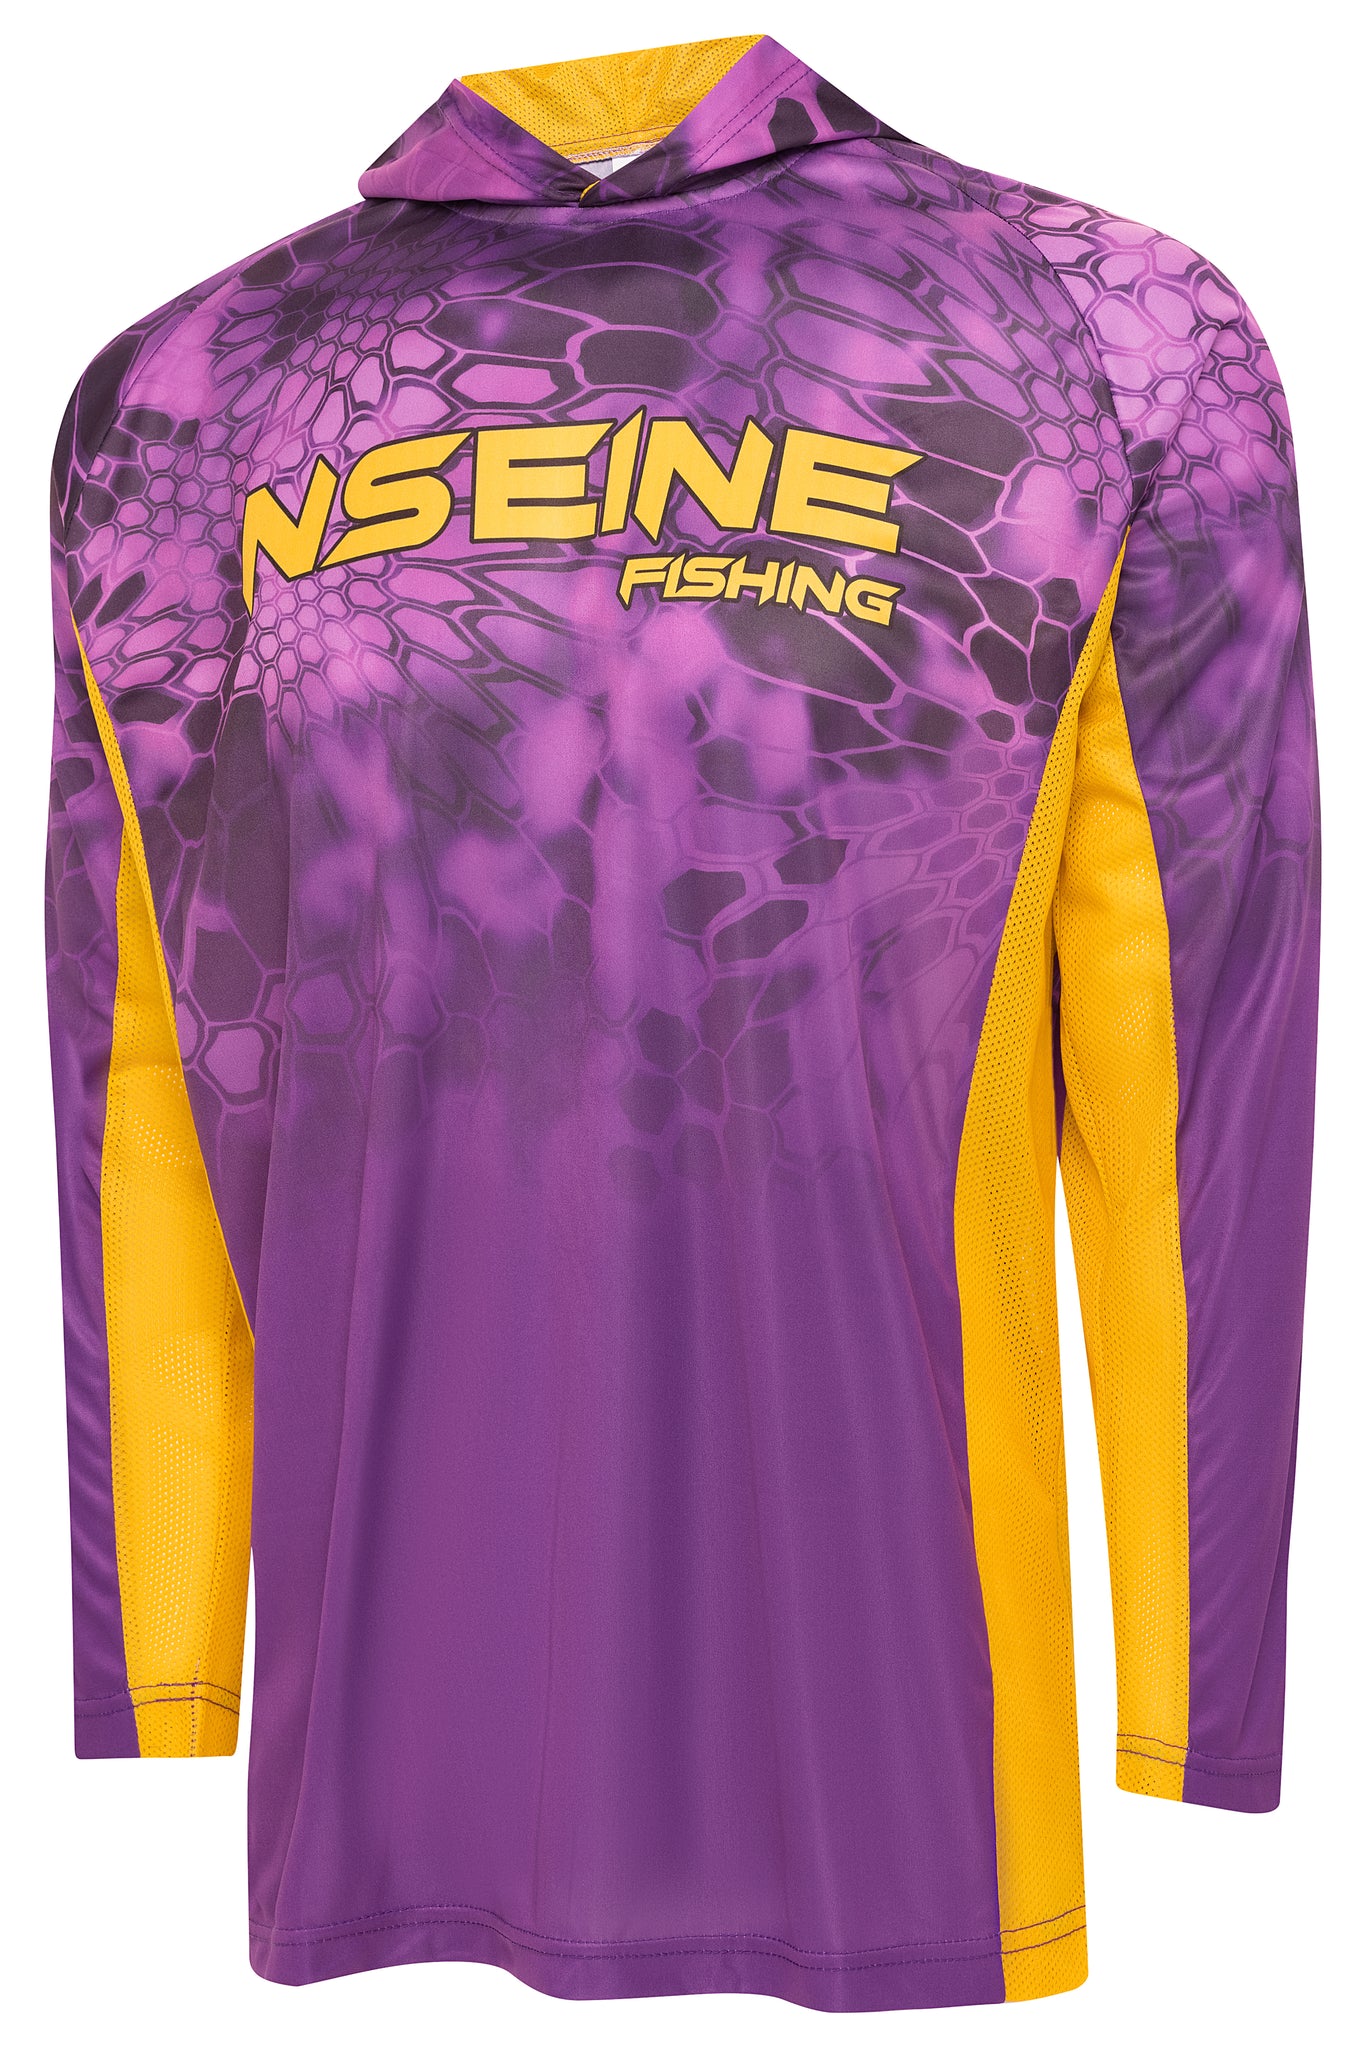 NSEINE Purple/Gold Vented/Hooded Long Sleeve Fishing Shirt – ZillaGear  Outdoor